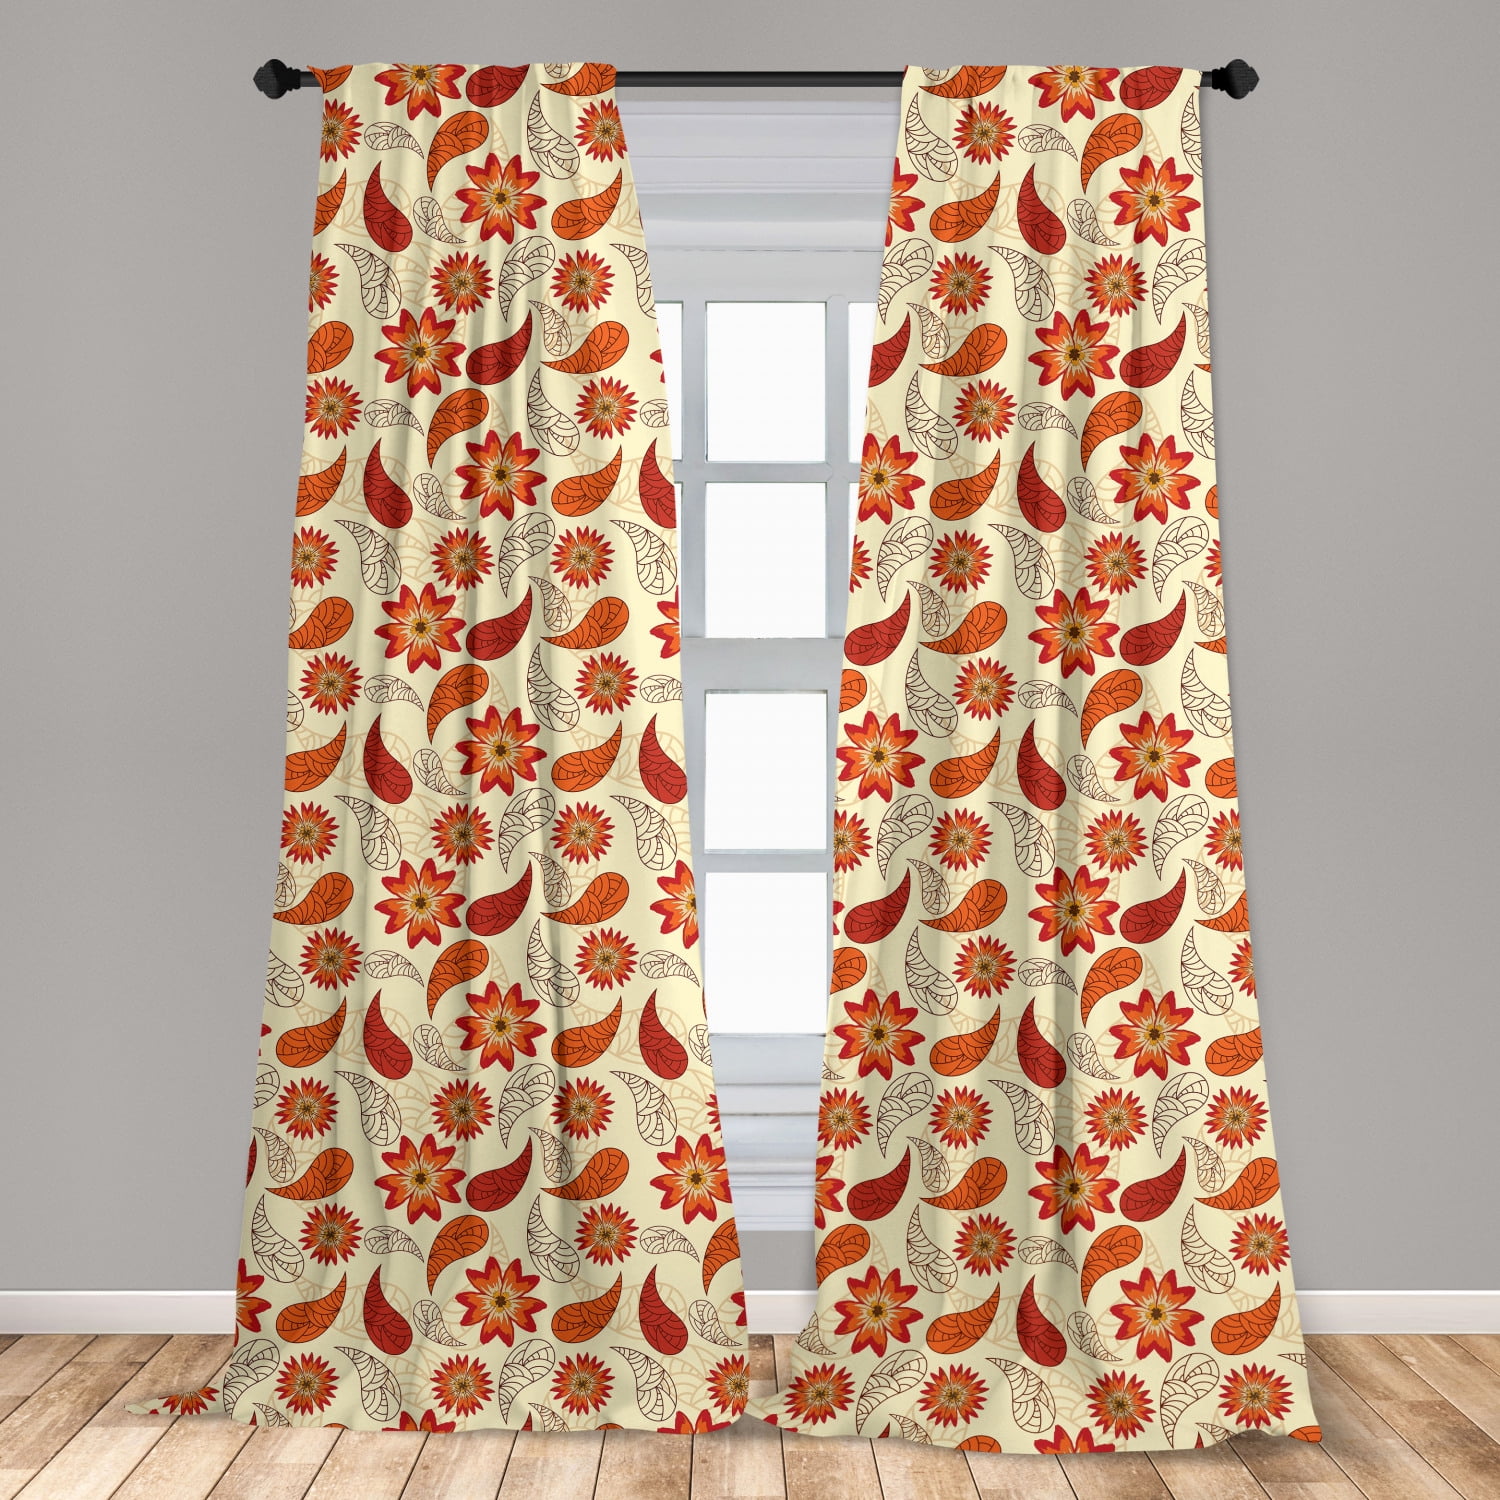 Poppie Kitchen Curtains In A Modern Embroidered Red Design Great Value For Money 